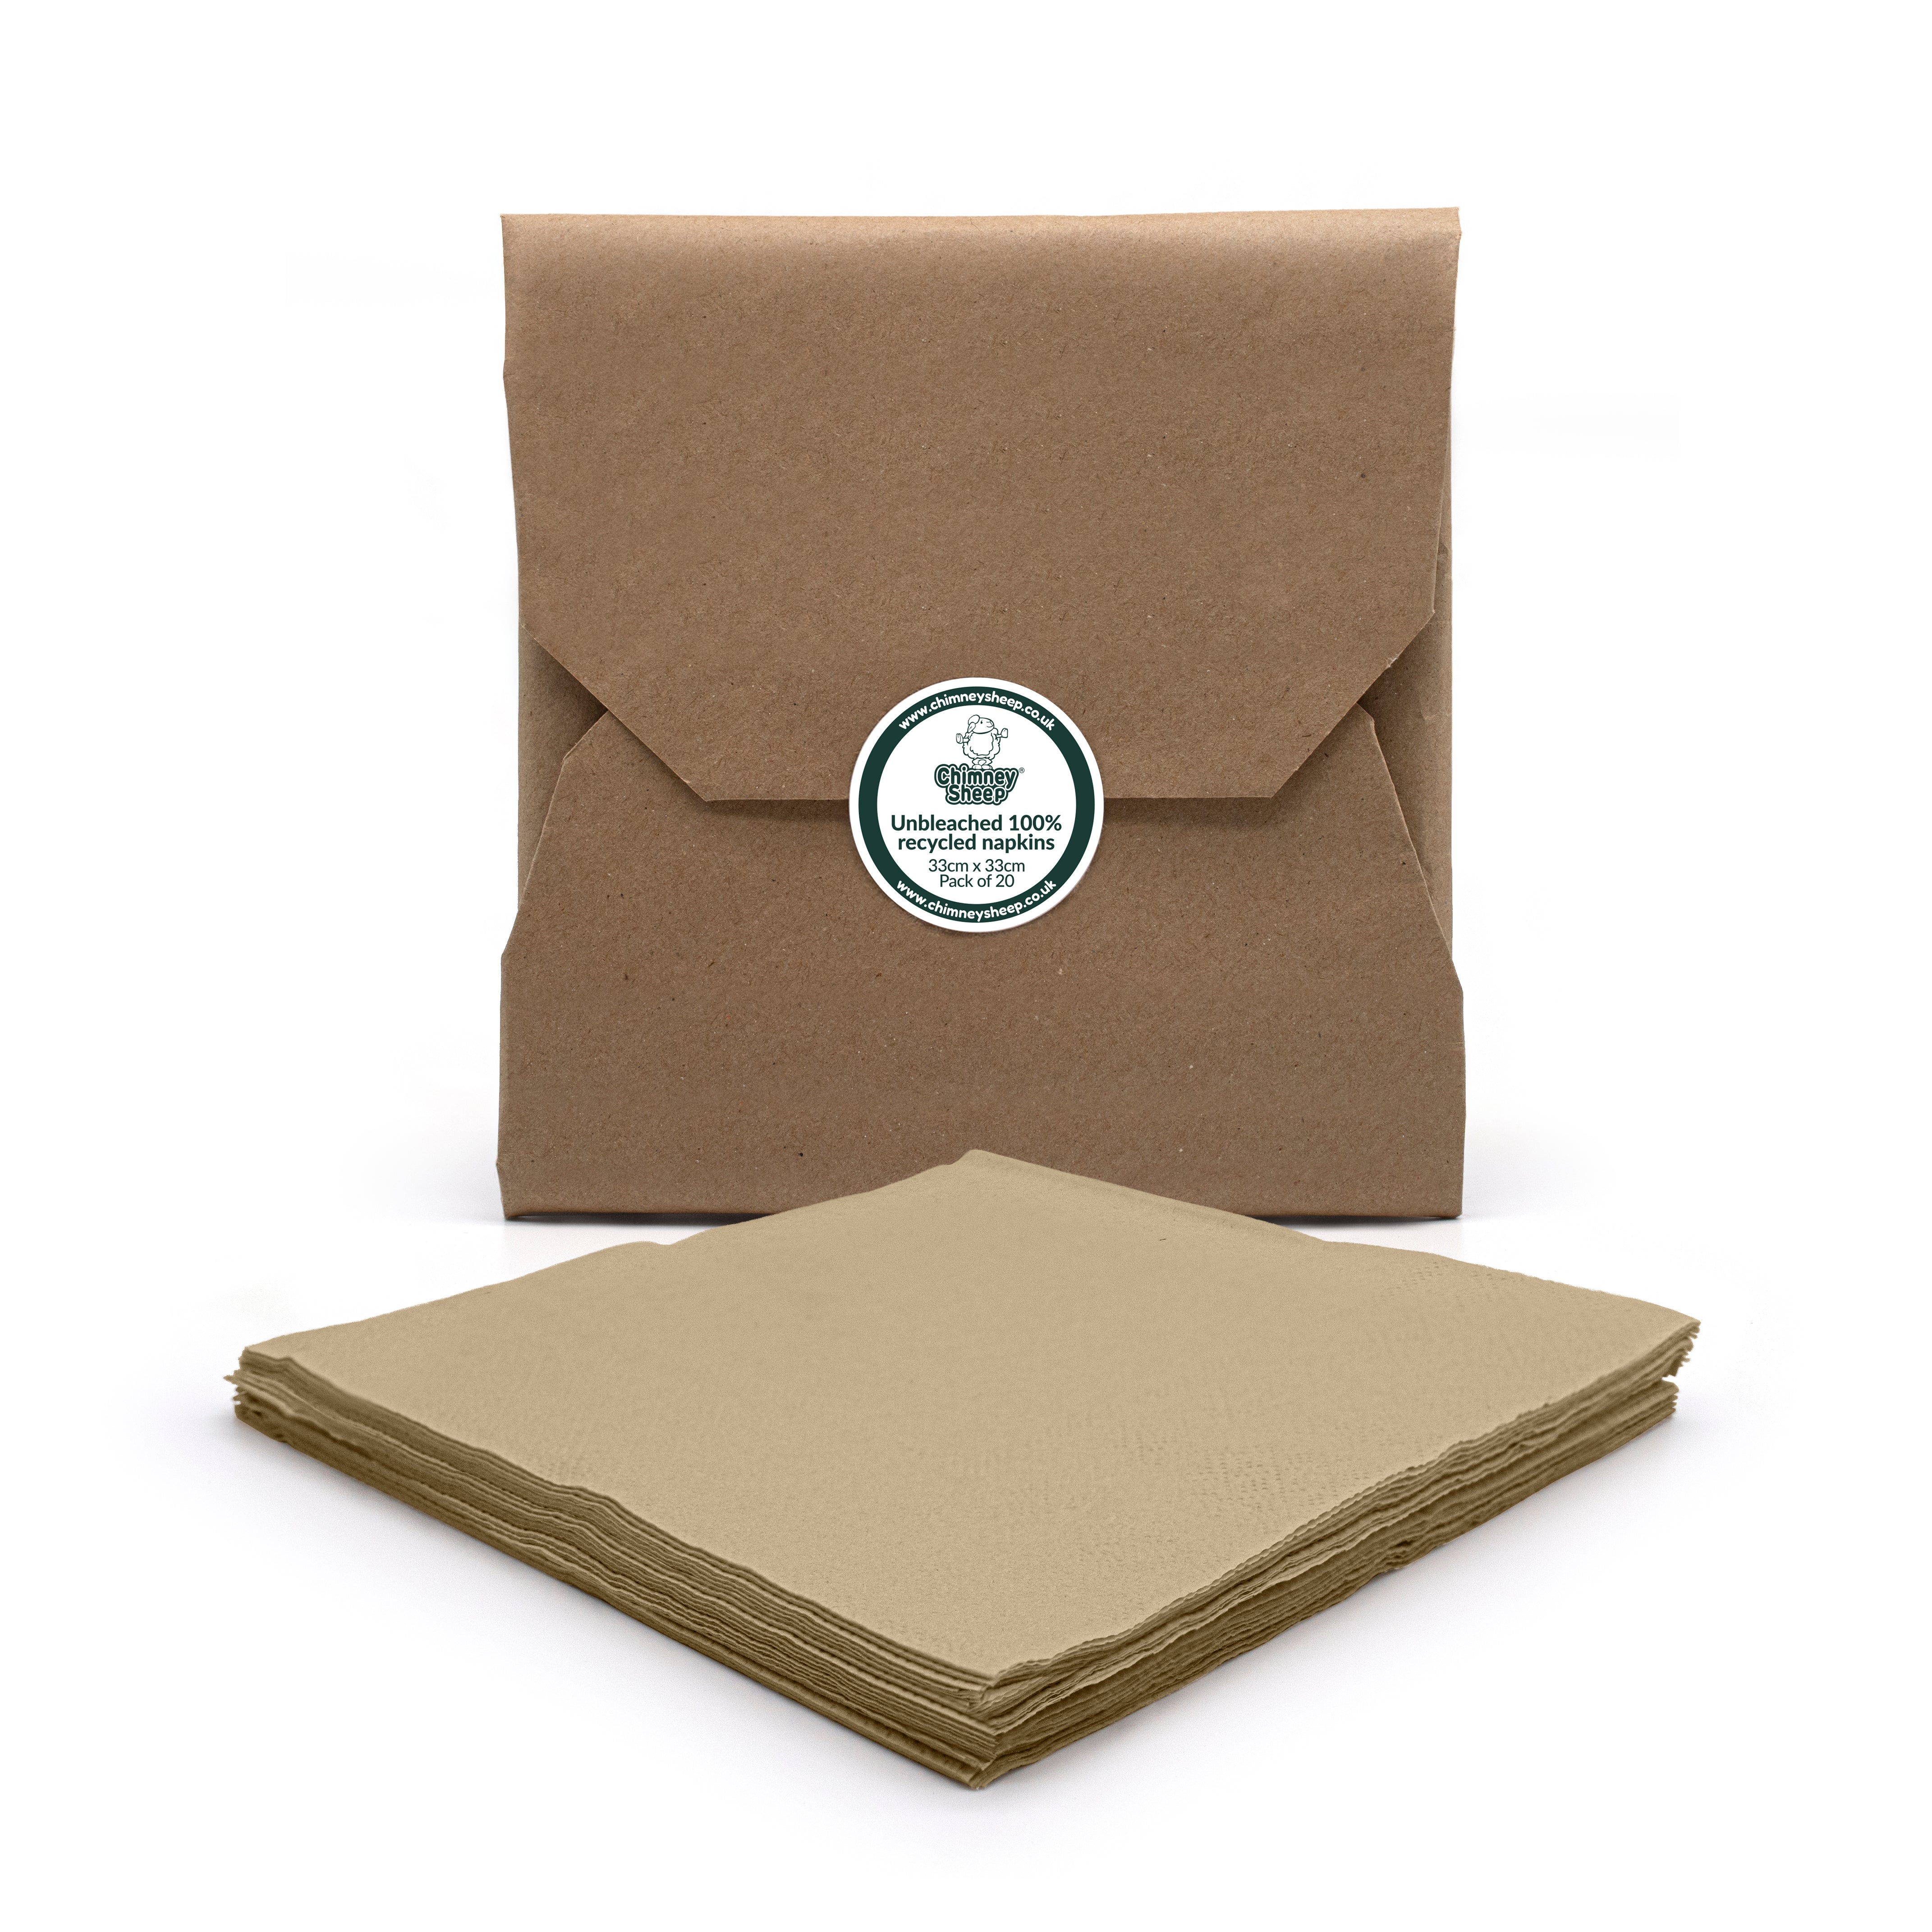 33cm recycled paper napkins in eco-friendly packaging